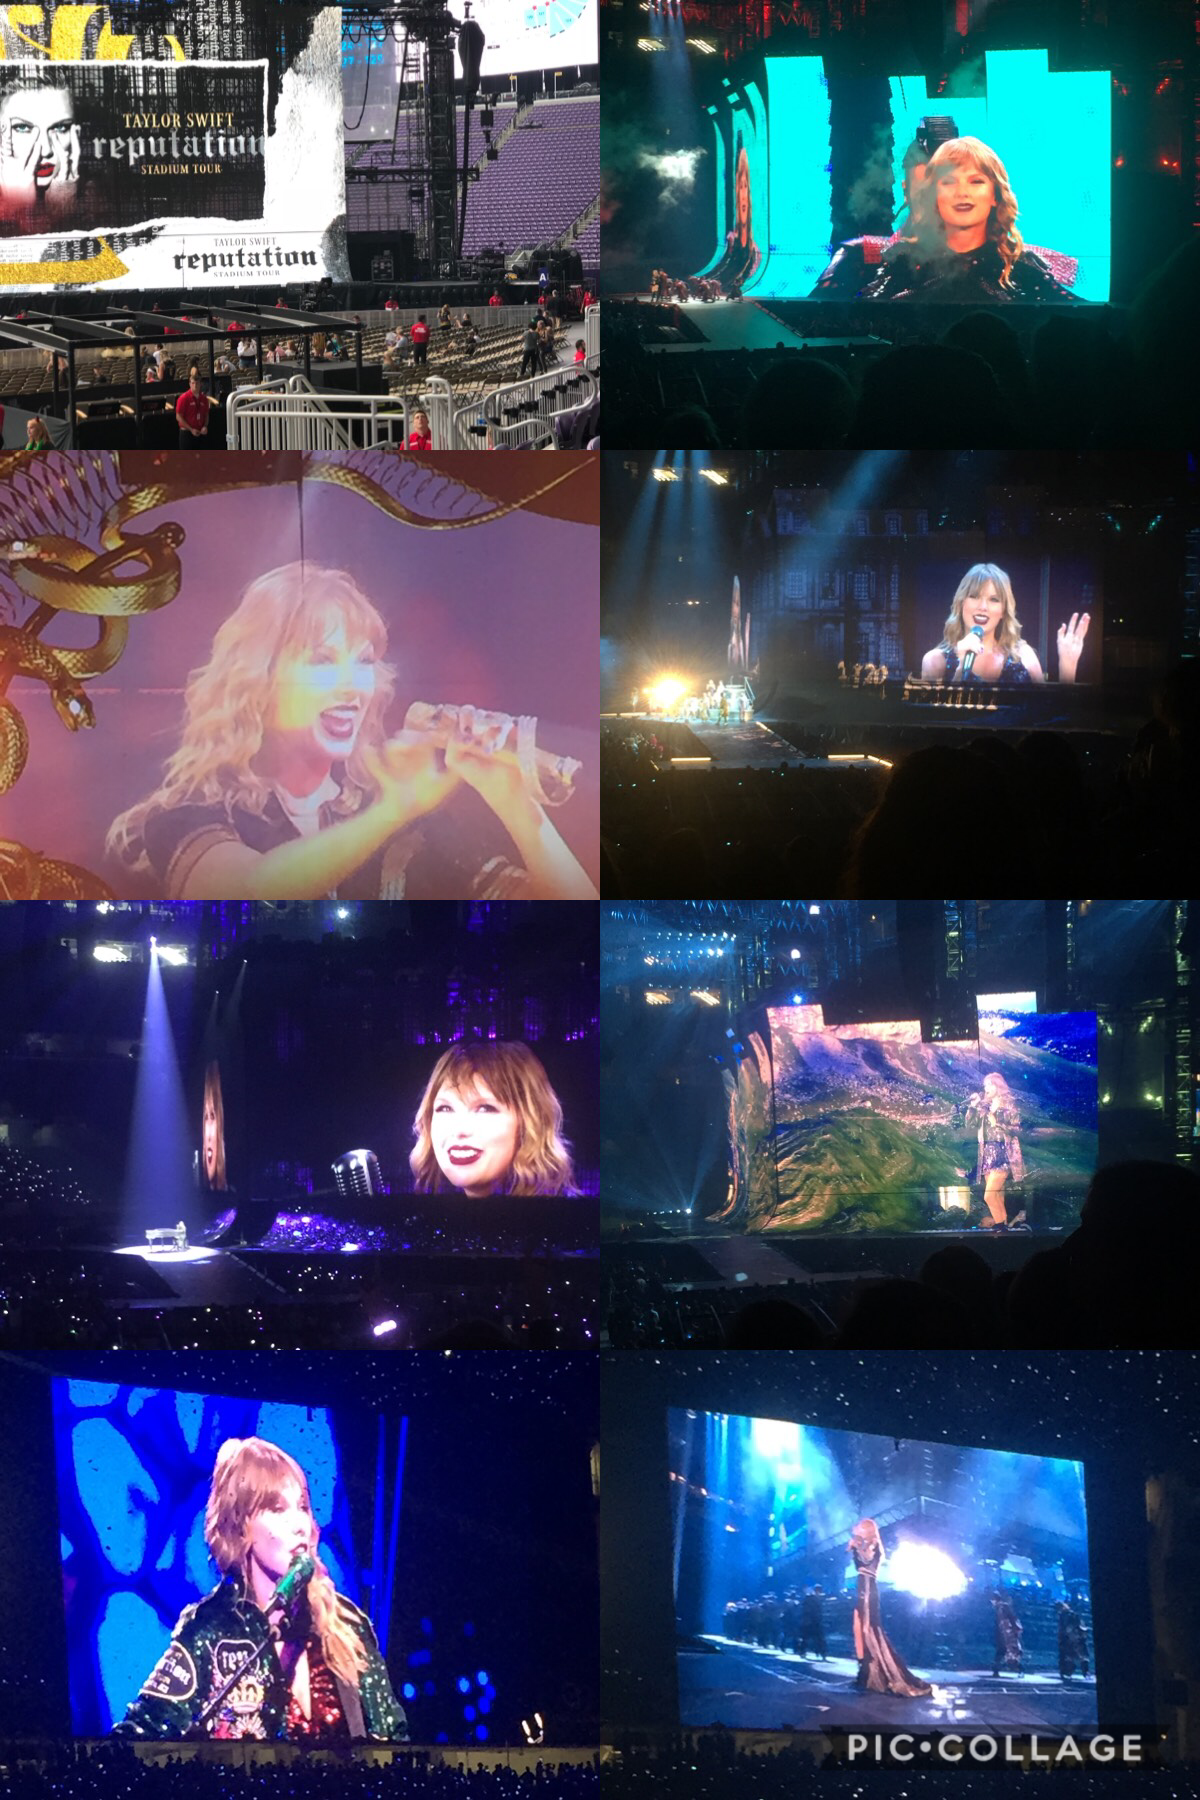 SPOILER ALERT: 🚨 
Taylor was so Amazing! Her tour is the best one yet tied with 1989! The pyro was so cool! Her stage was giant!!! I sat right by one of the b stages! I got some merch too! Don’t blame me was EPIC! LWYMMD was so COOL!! Love Story was just 